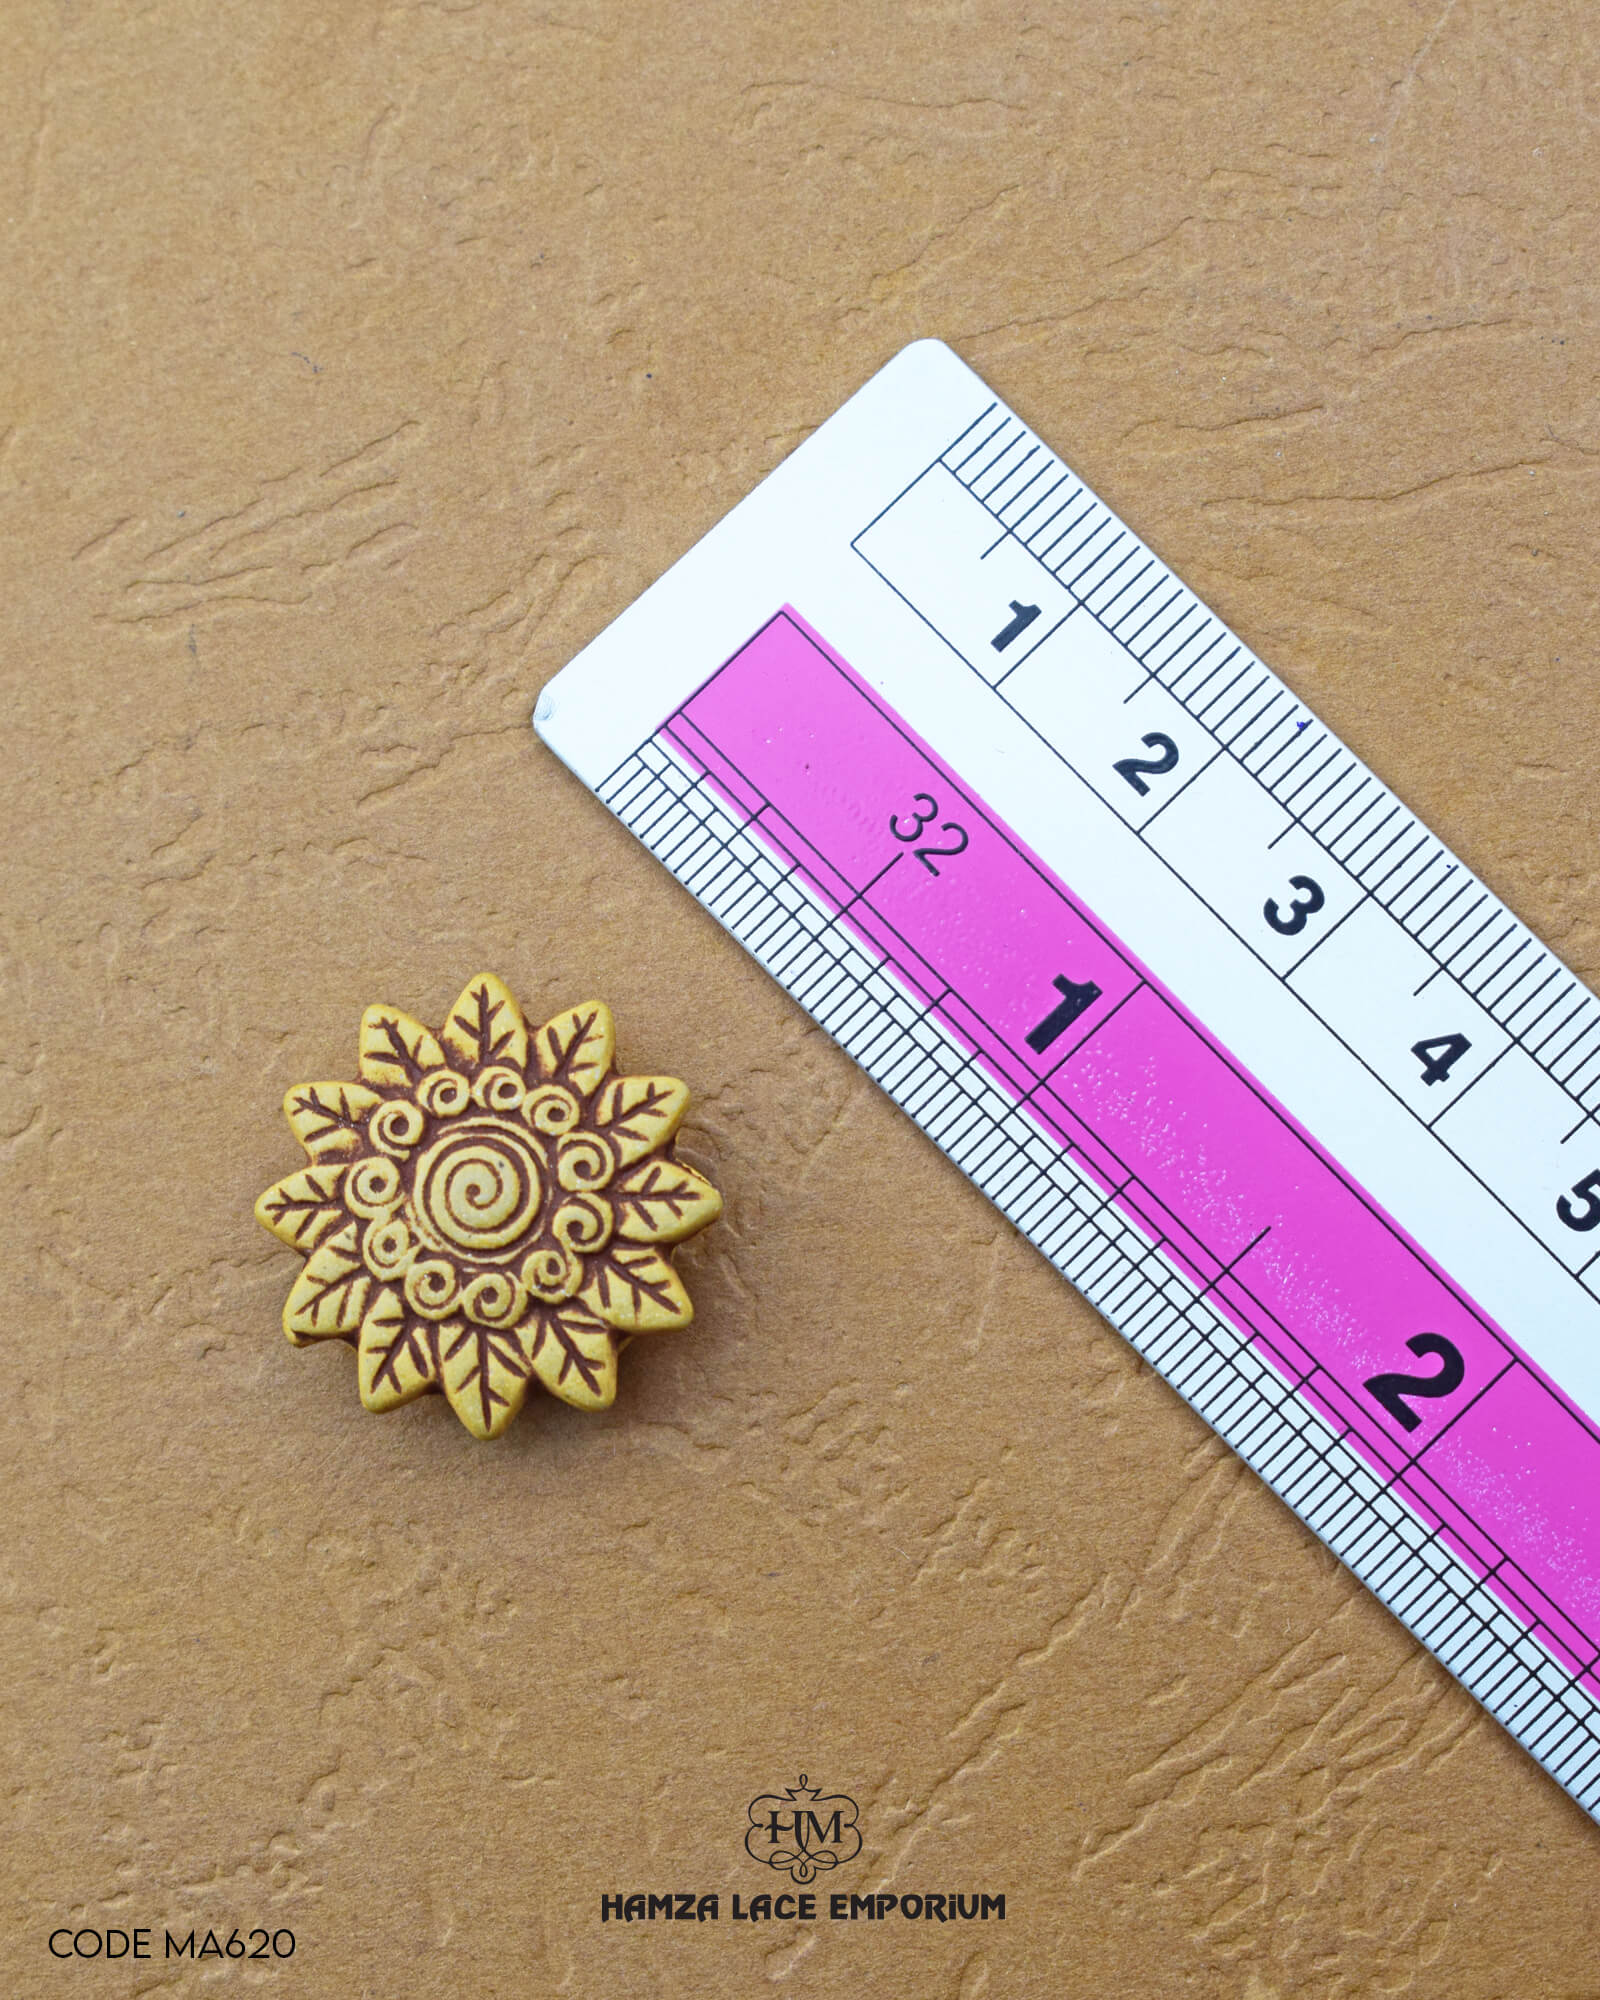 Size of the 'Star Design Wood Button MA620' is shown with a ruler